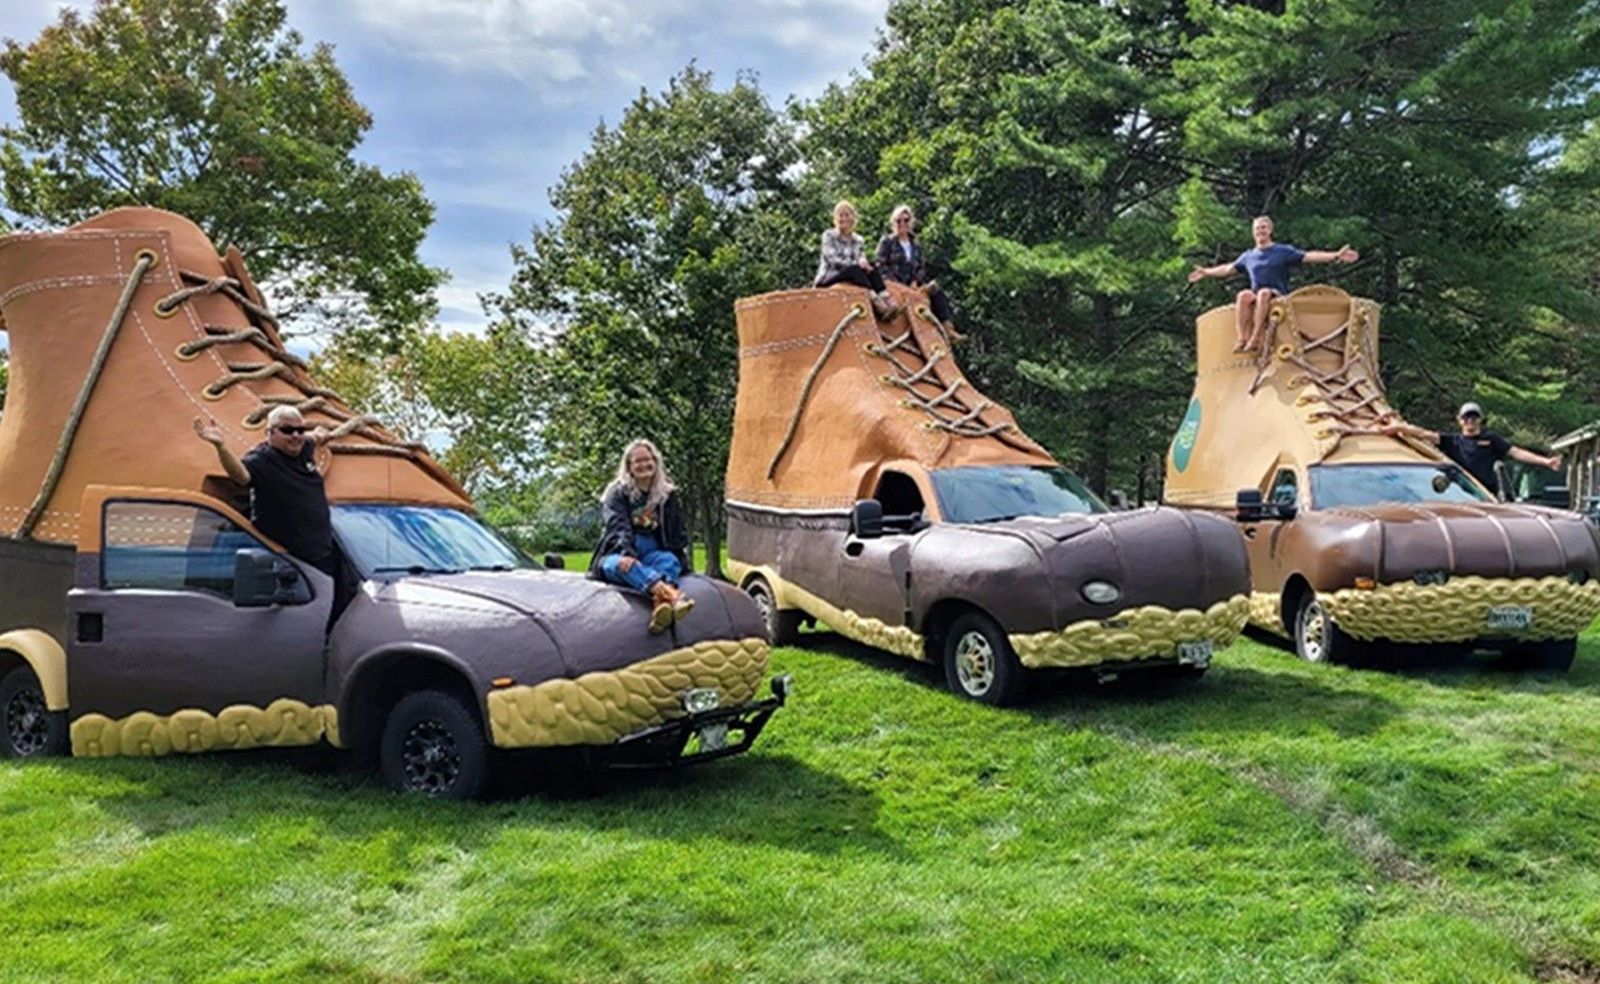 World's first boot-shaped automobile, world record set in Freeport, Maine
